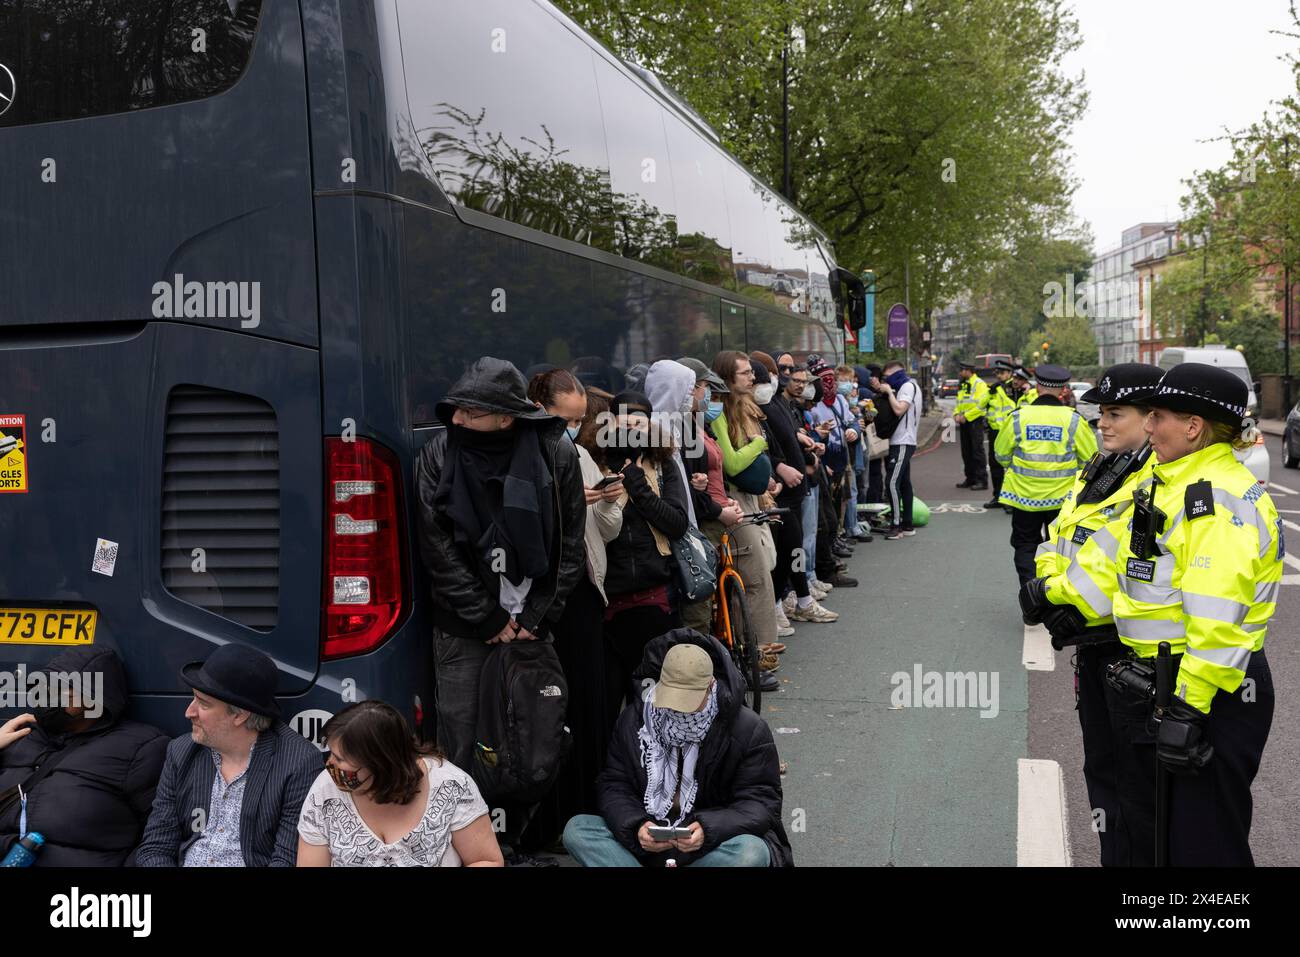 A coach sent to collect asylum seekers and take them to the Bibby Stockholm barge surrounded by protesters in Peckham south London England, UK Stock Photo